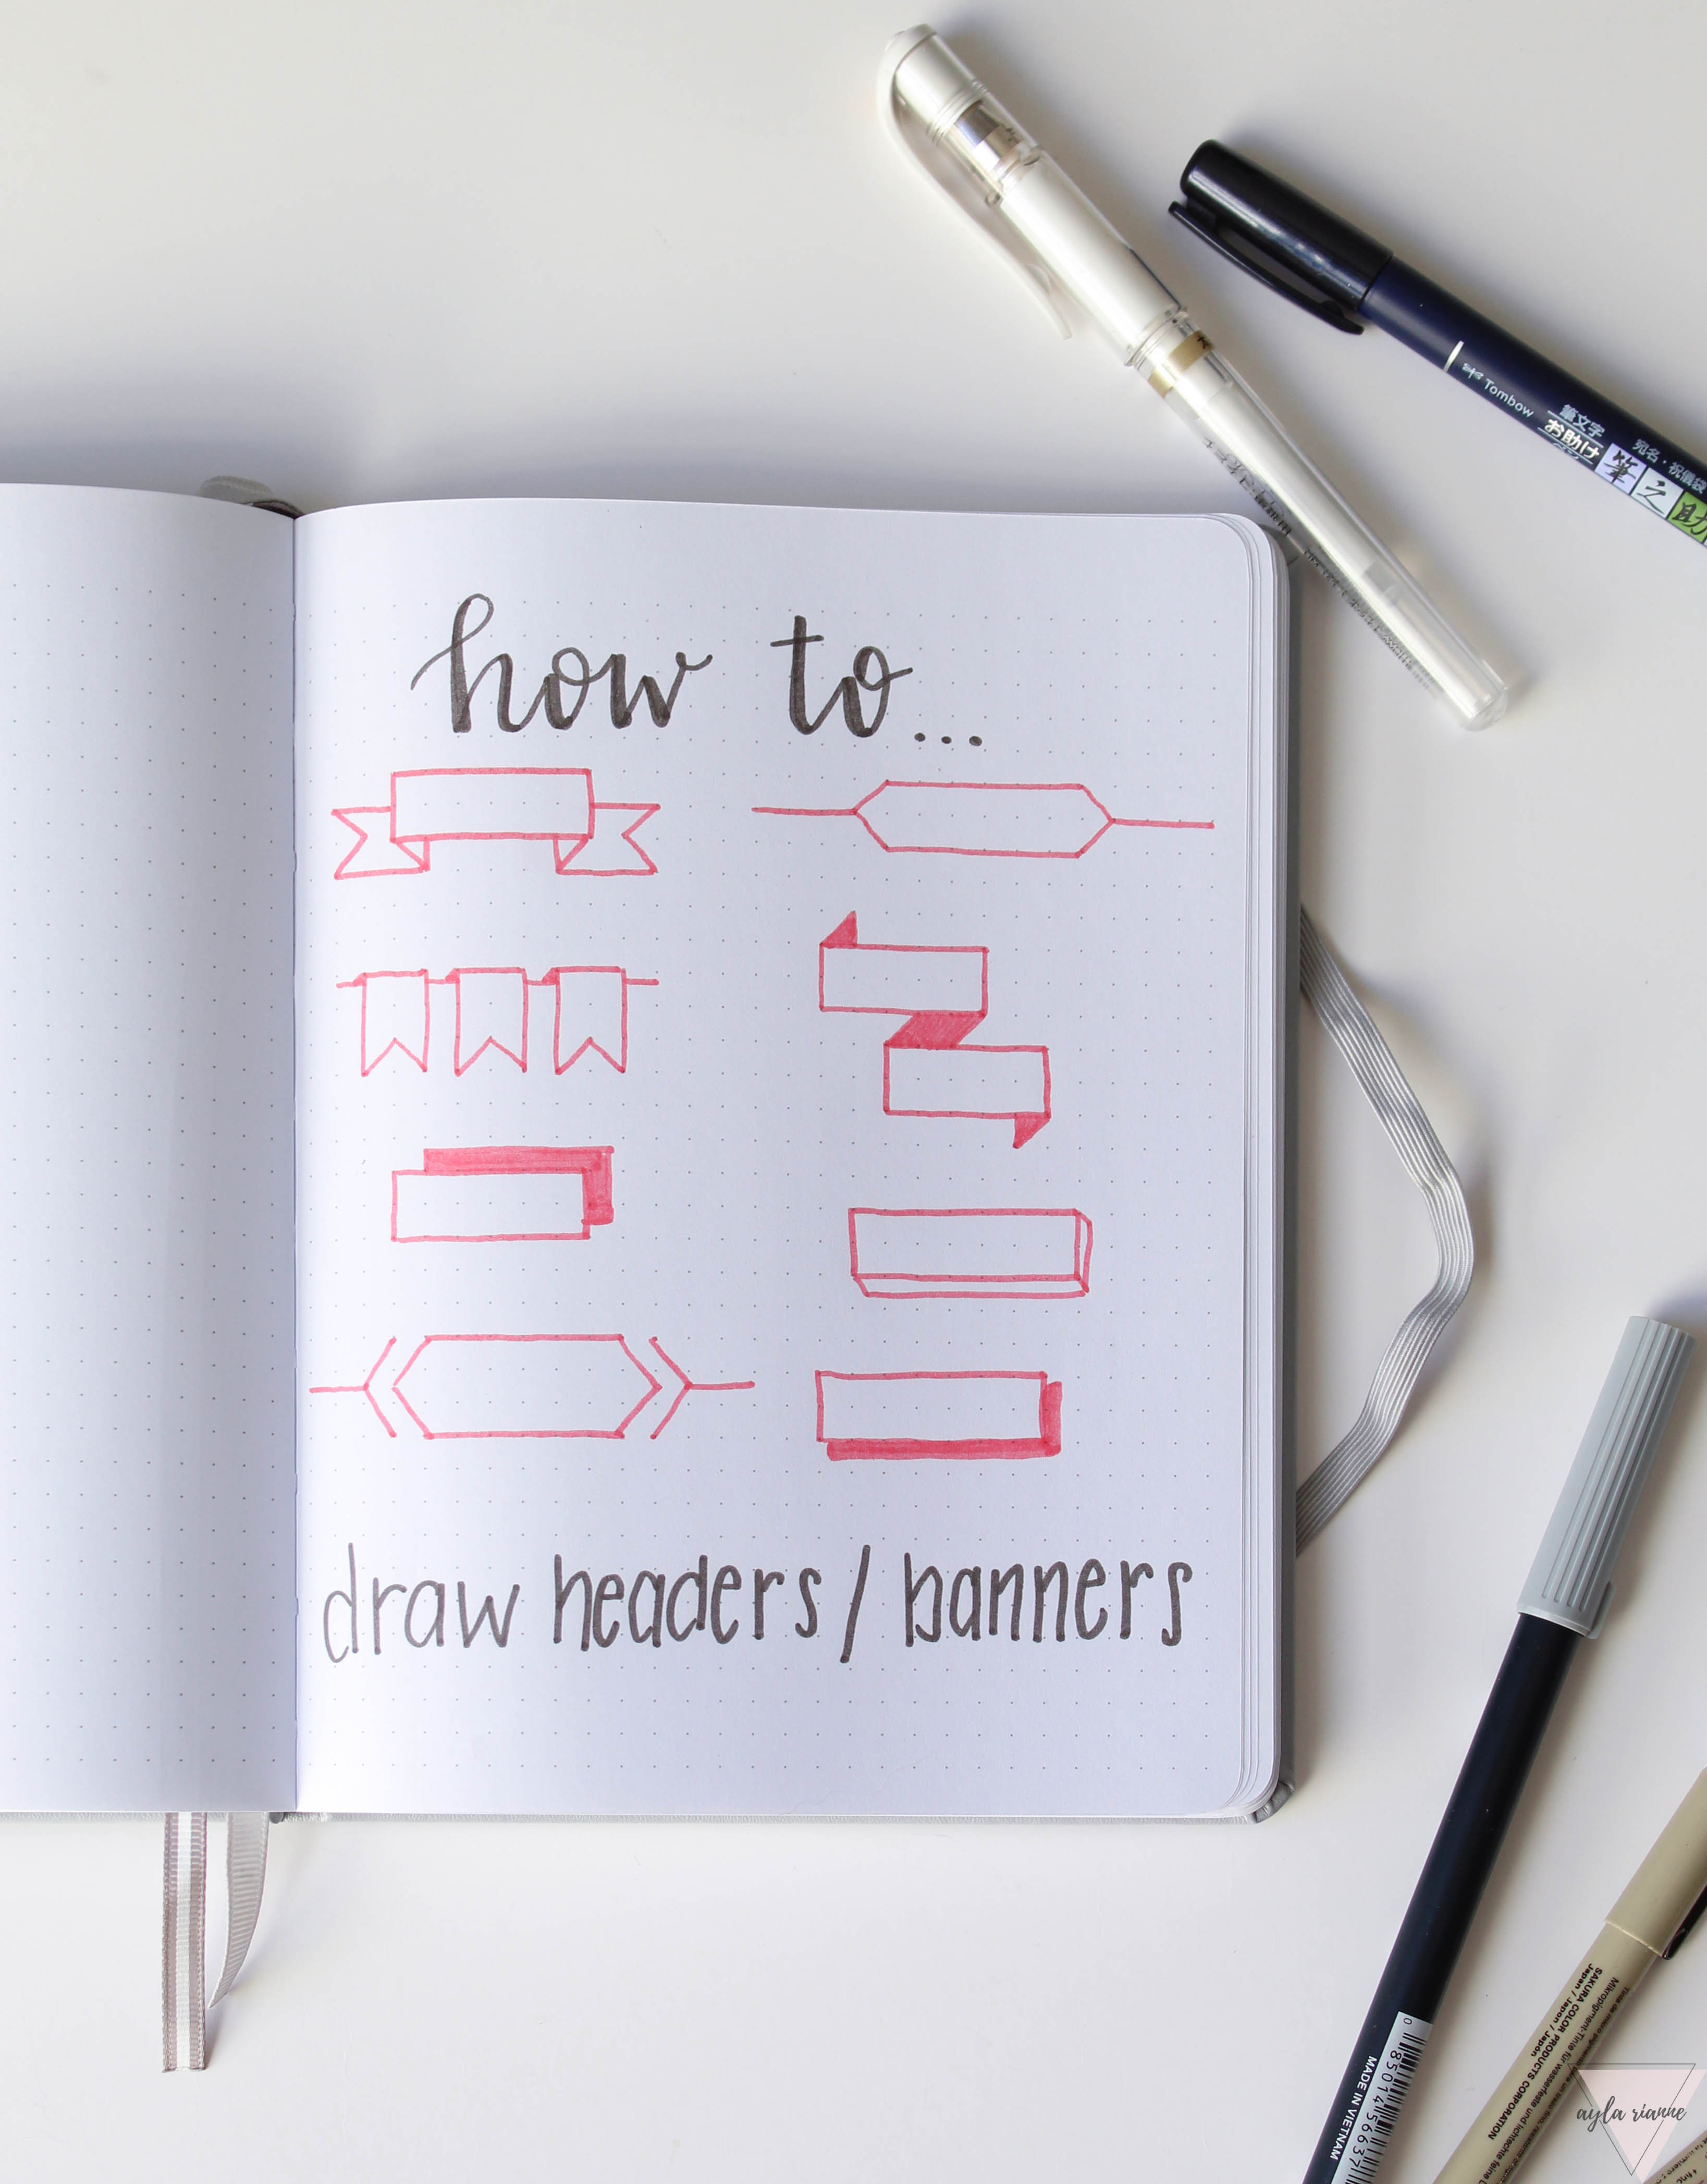 How to draw bullet journal headers and banners #aylarianne #bulletjournal #bujo #howtodrawheaders #drawingheaders